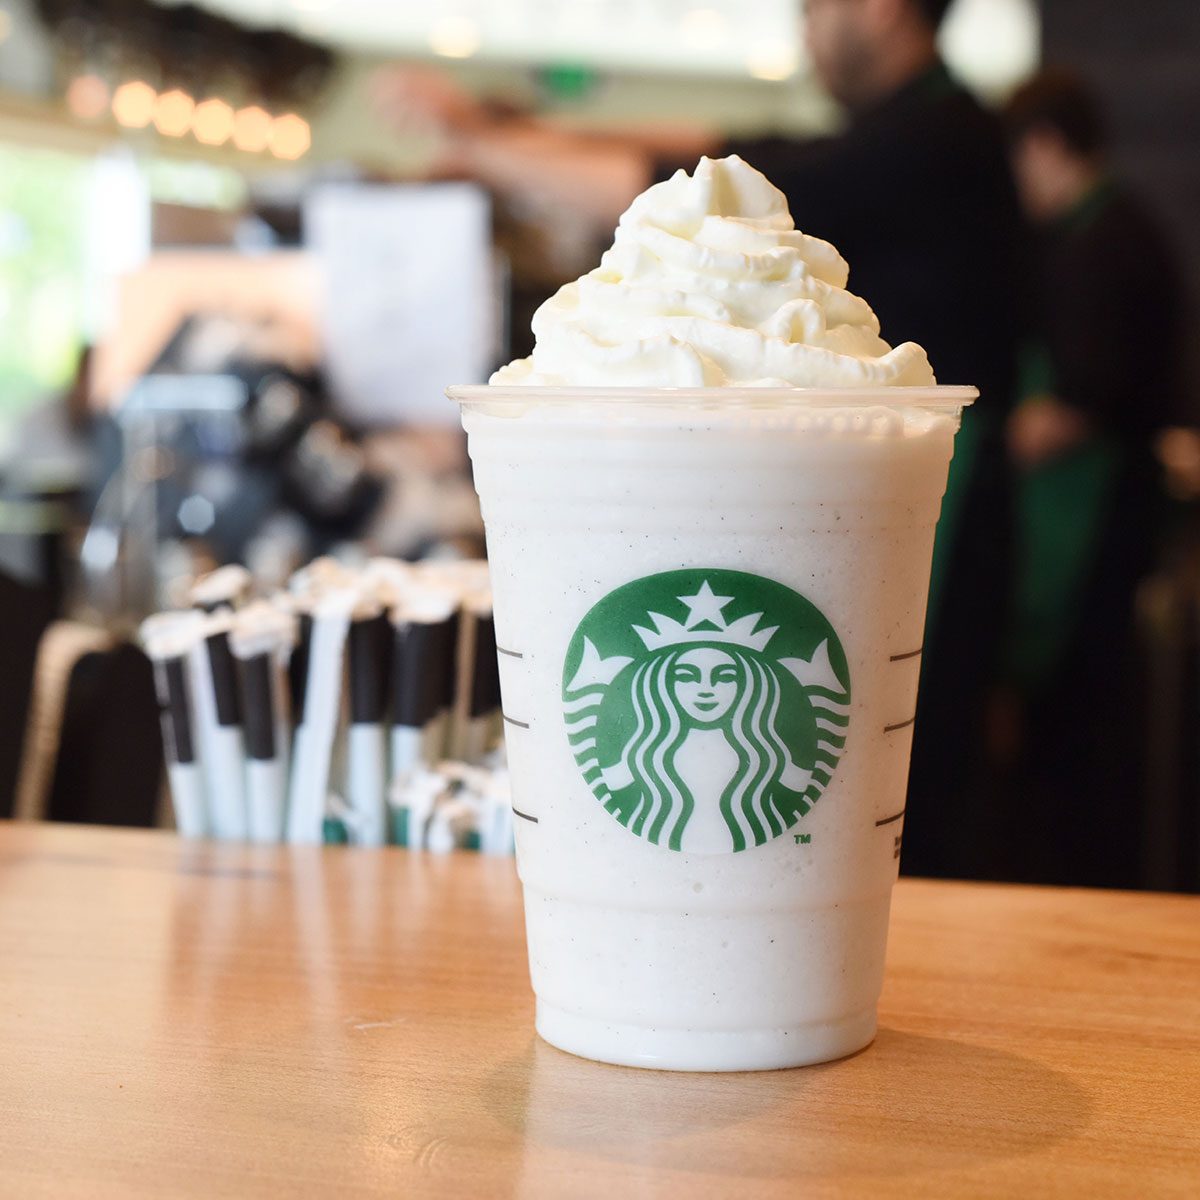 10 Delicious CaffeineFree Drinks at Starbucks (That Aren't Decaf Coffee)